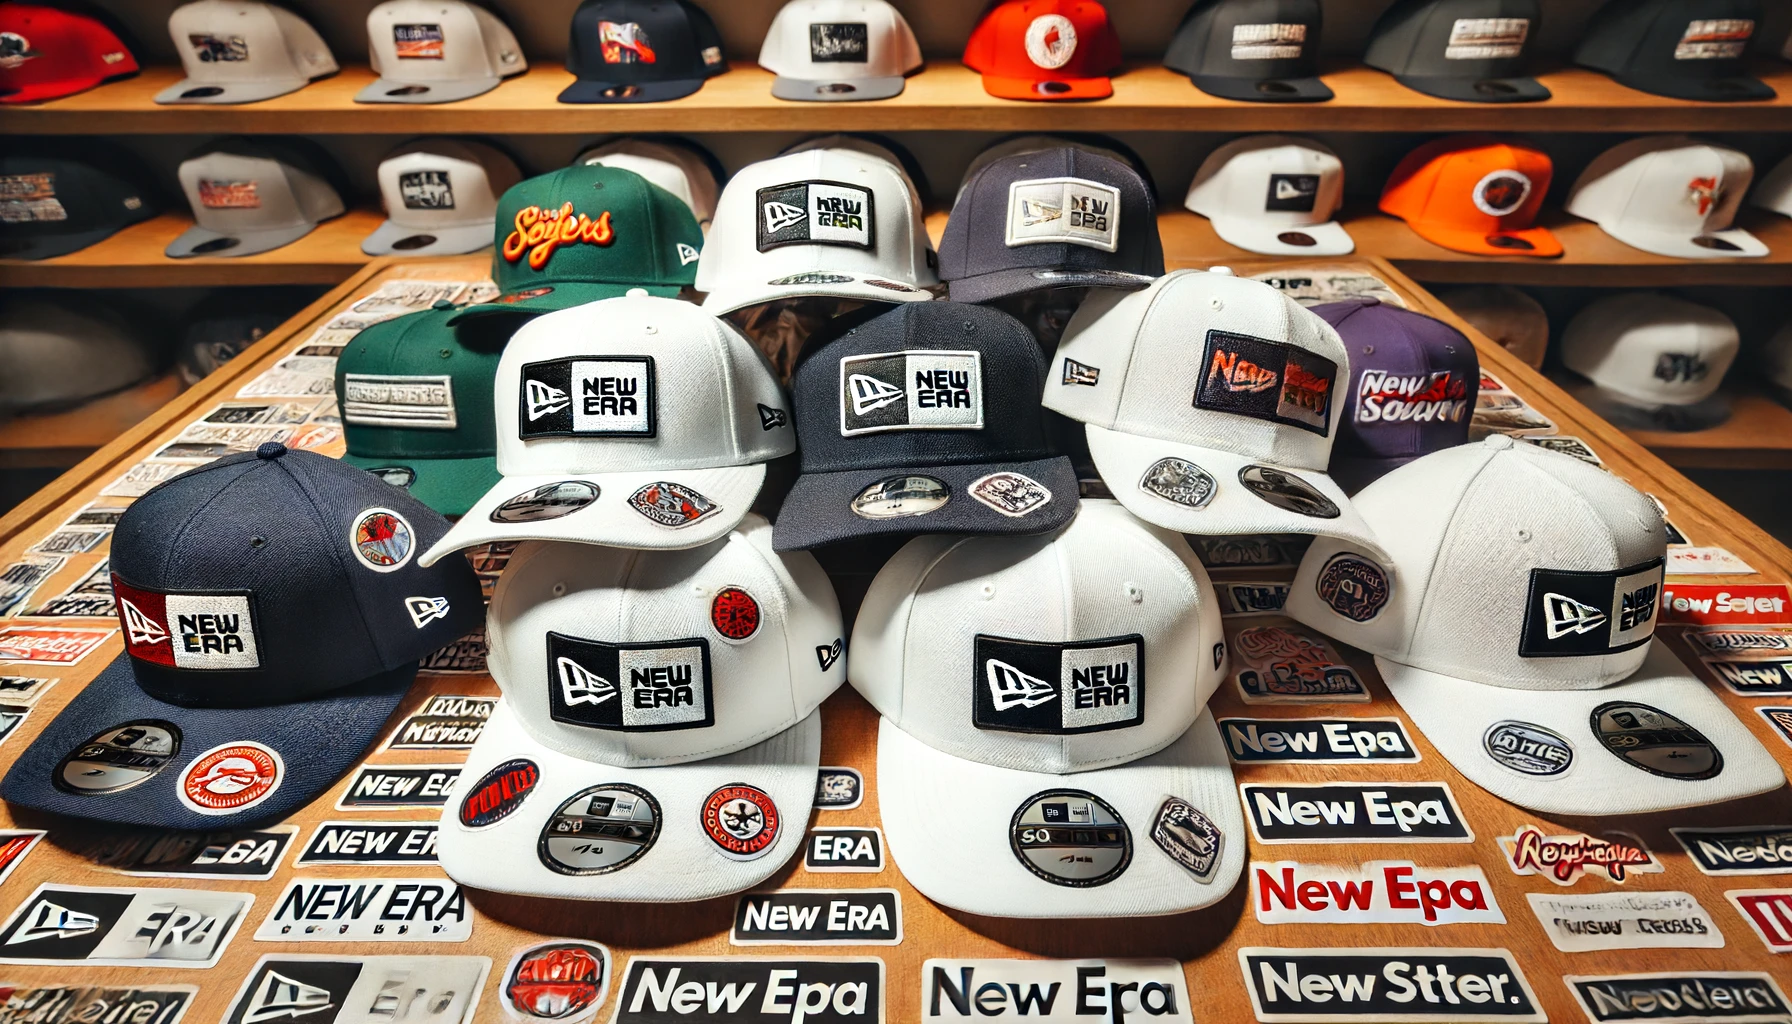 A stylish arrangement of New Era caps, emphasizing the aesthetic appeal of the stickers on the brims. The caps are neatly displayed, showcasing the trendy look of the stickers.